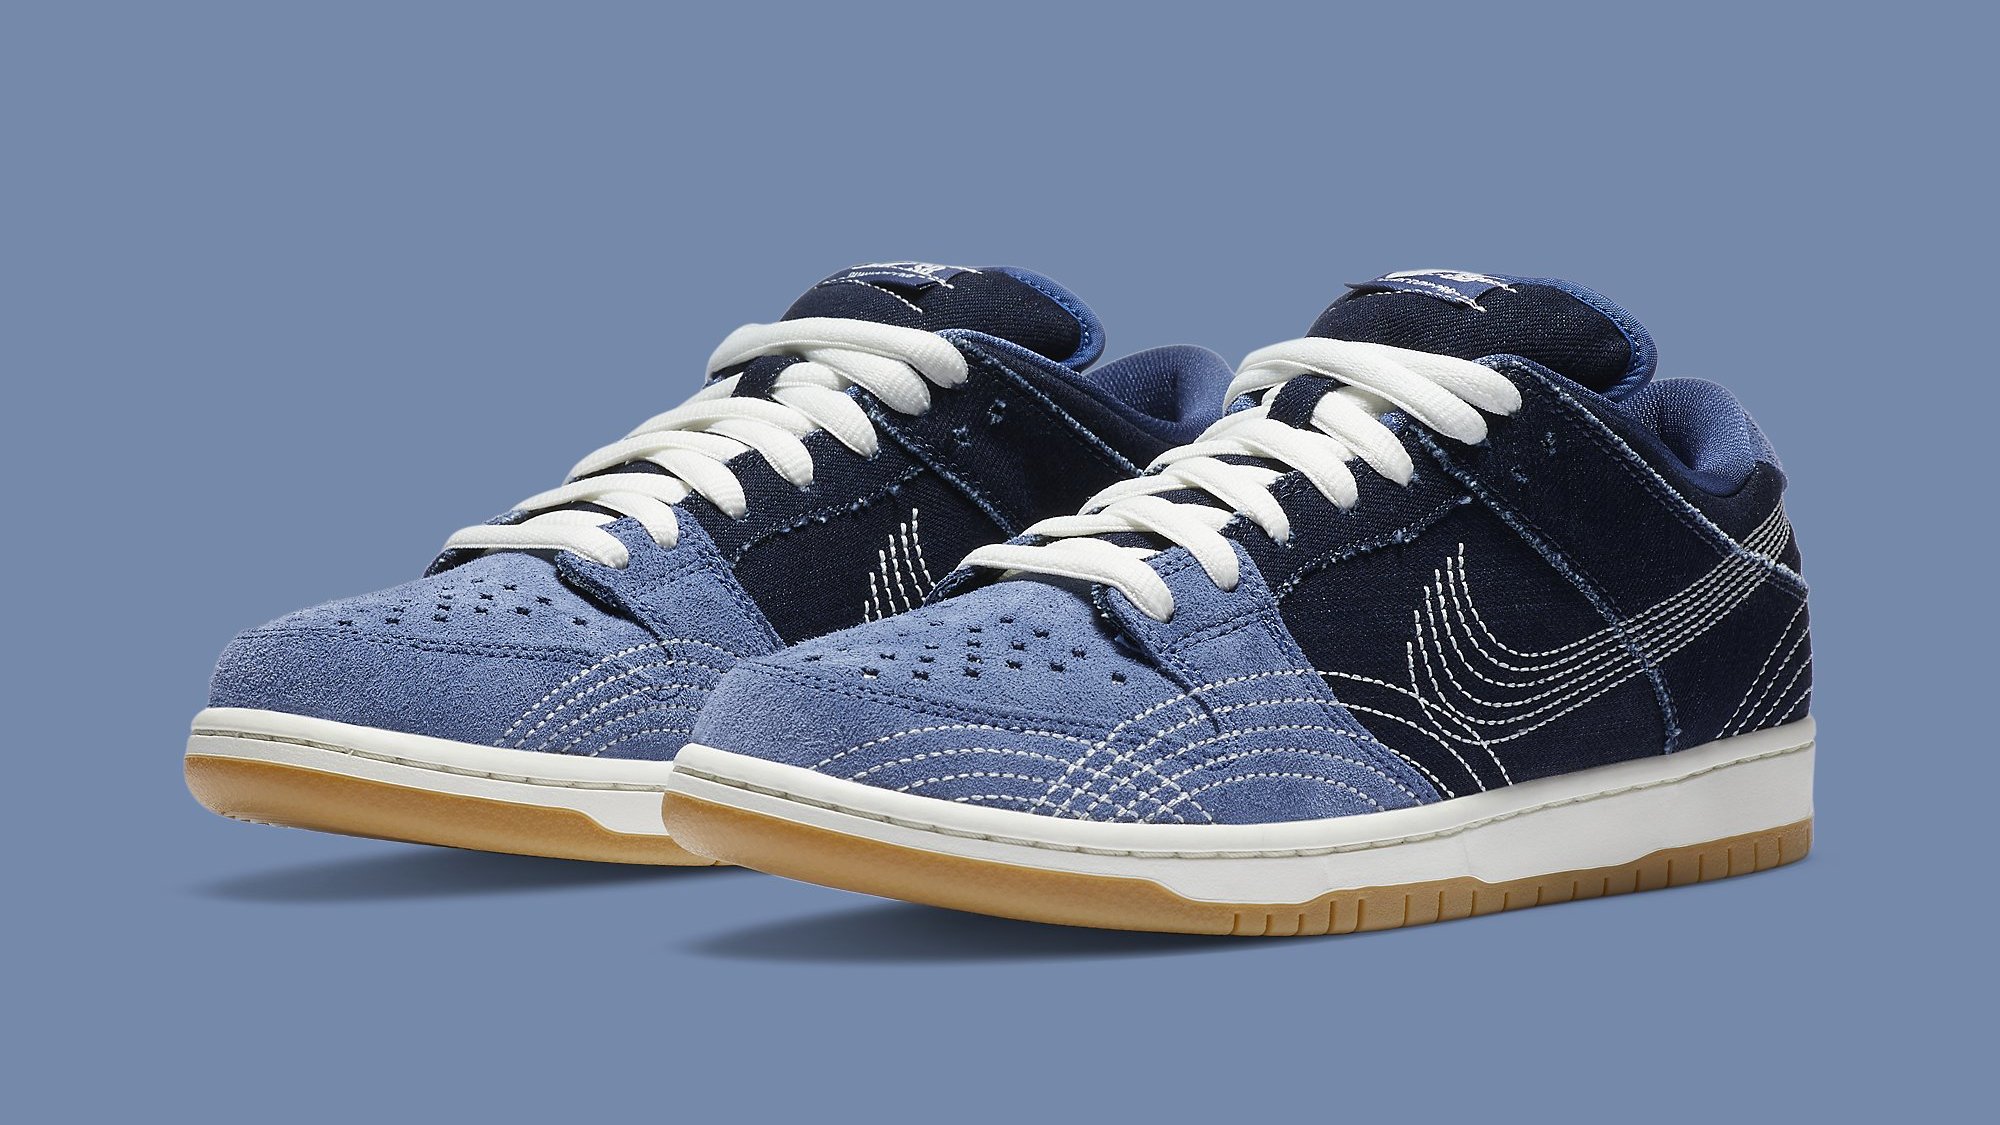 This SB Dunk Low Is Releasing Overseas This Week | Complex